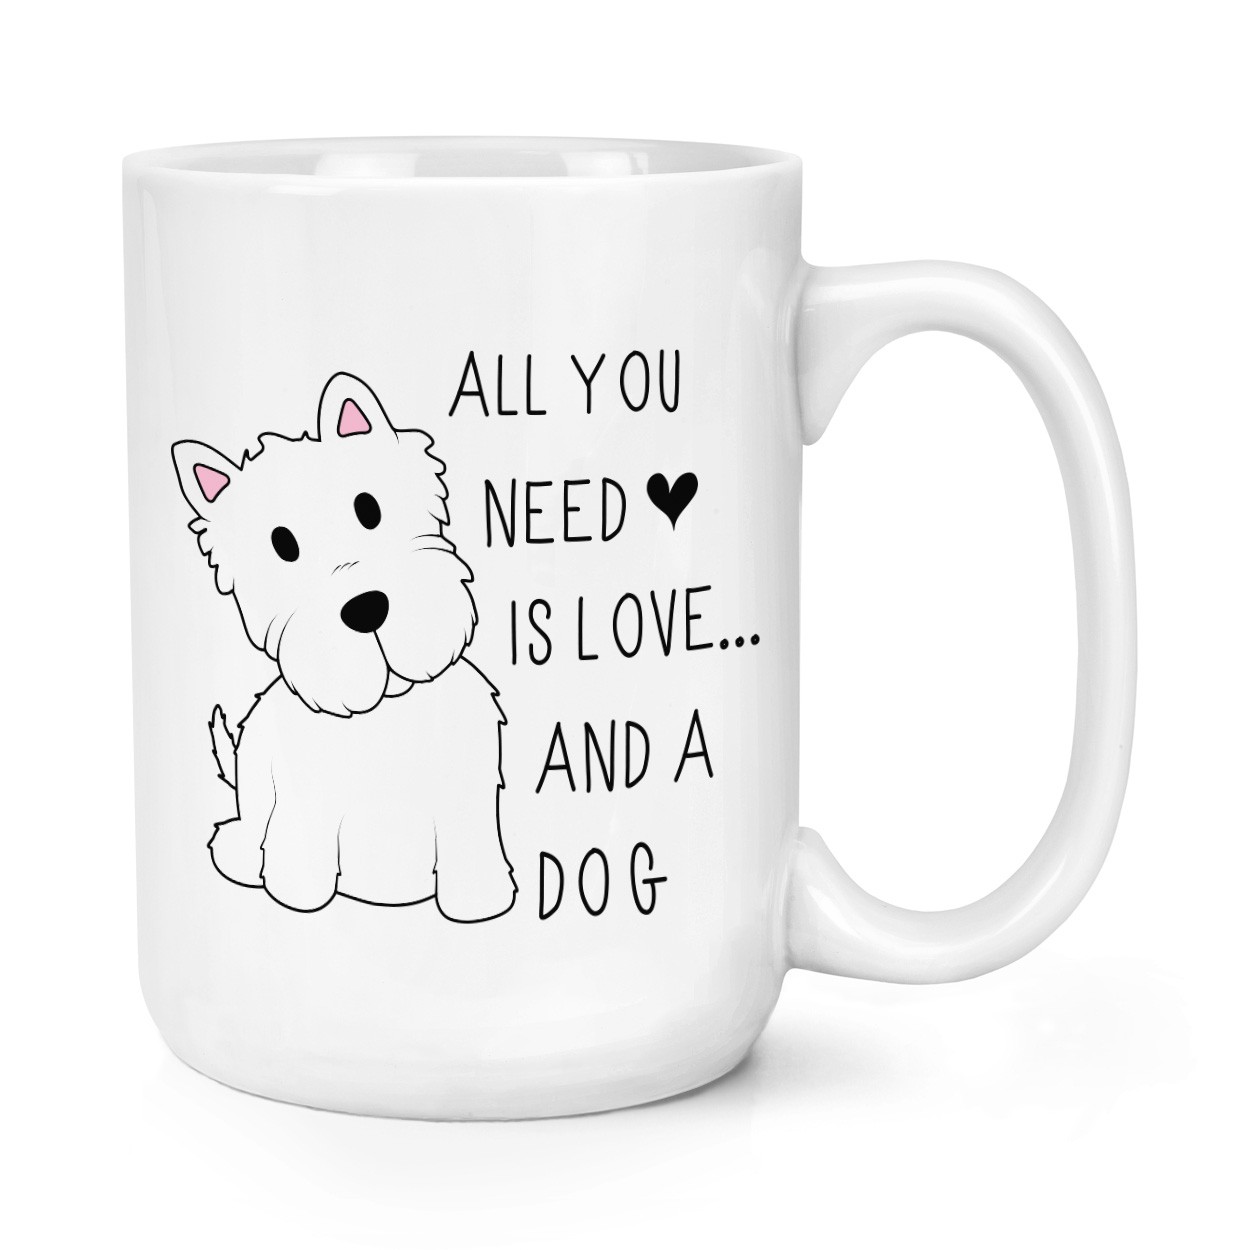 All You Need Is Love And A Dog 15oz Large Mug Cup